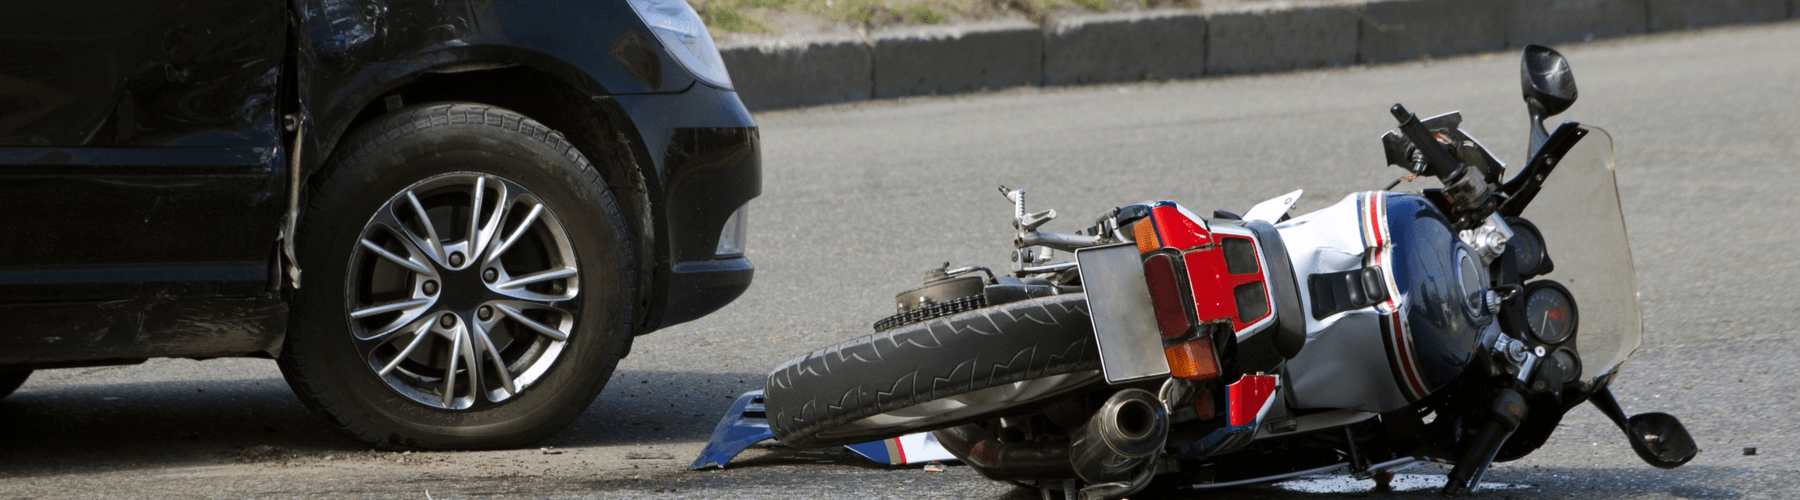 collision with vehicle with wrecked bike on the ground